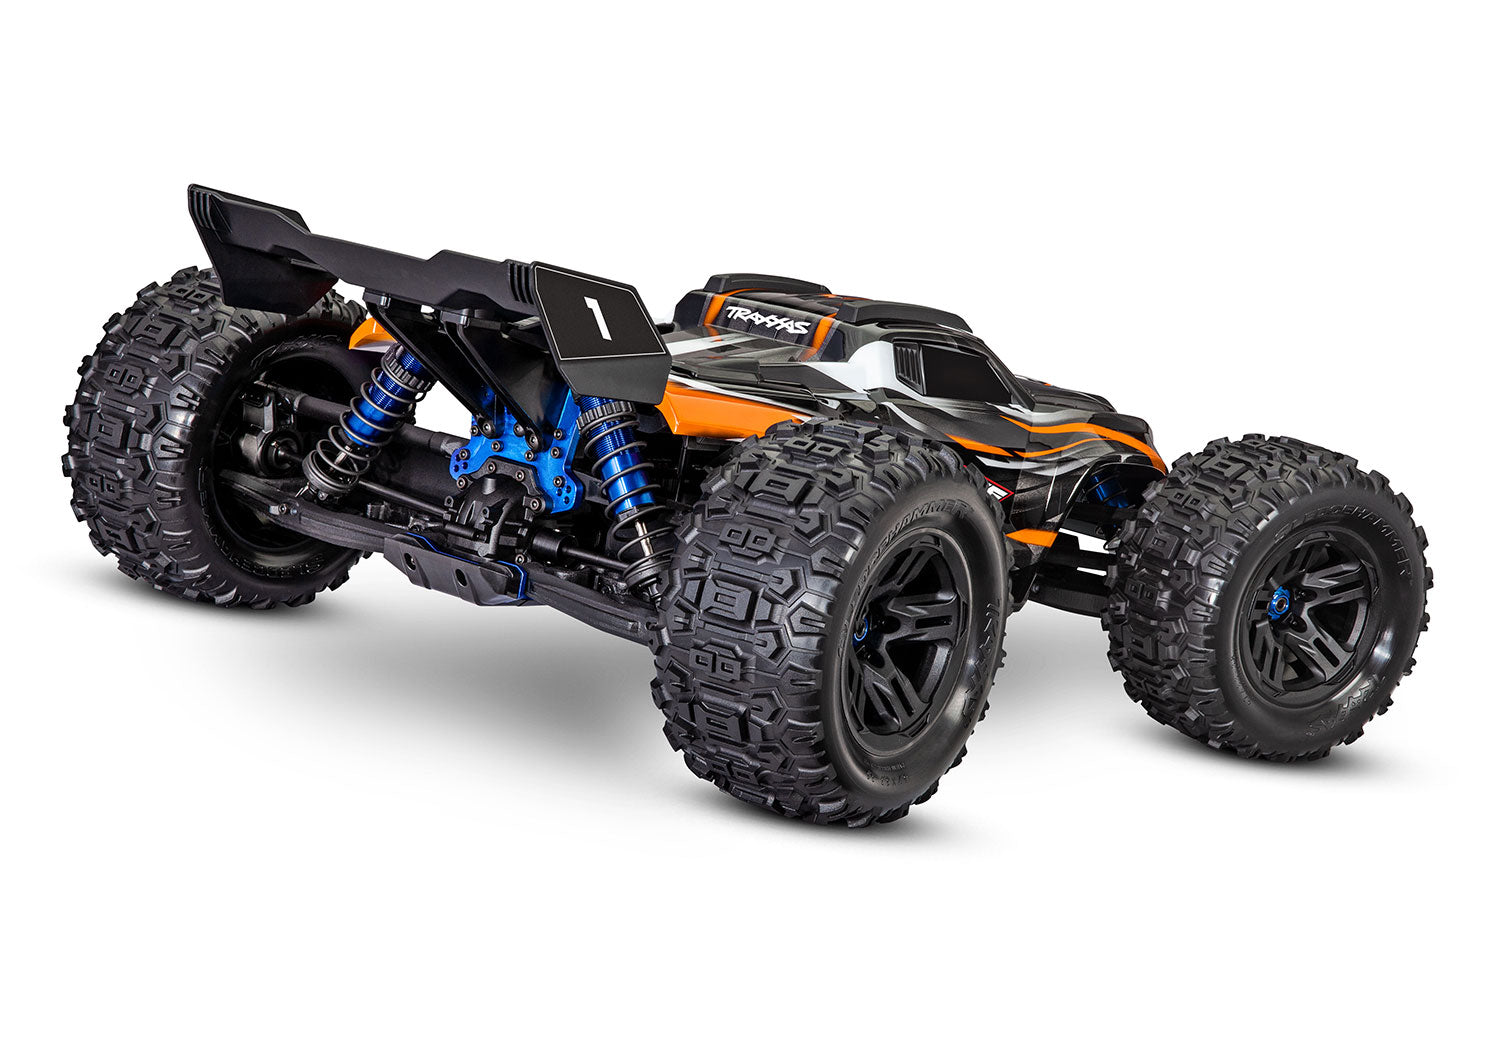 Orange Sledge®: 1/8 Scale 4WD Brushless Electric Monster Truck with TQi 2.4GHz Traxxas Link™ Enabled Radio System and Traxxas Stability Management (TSM)®